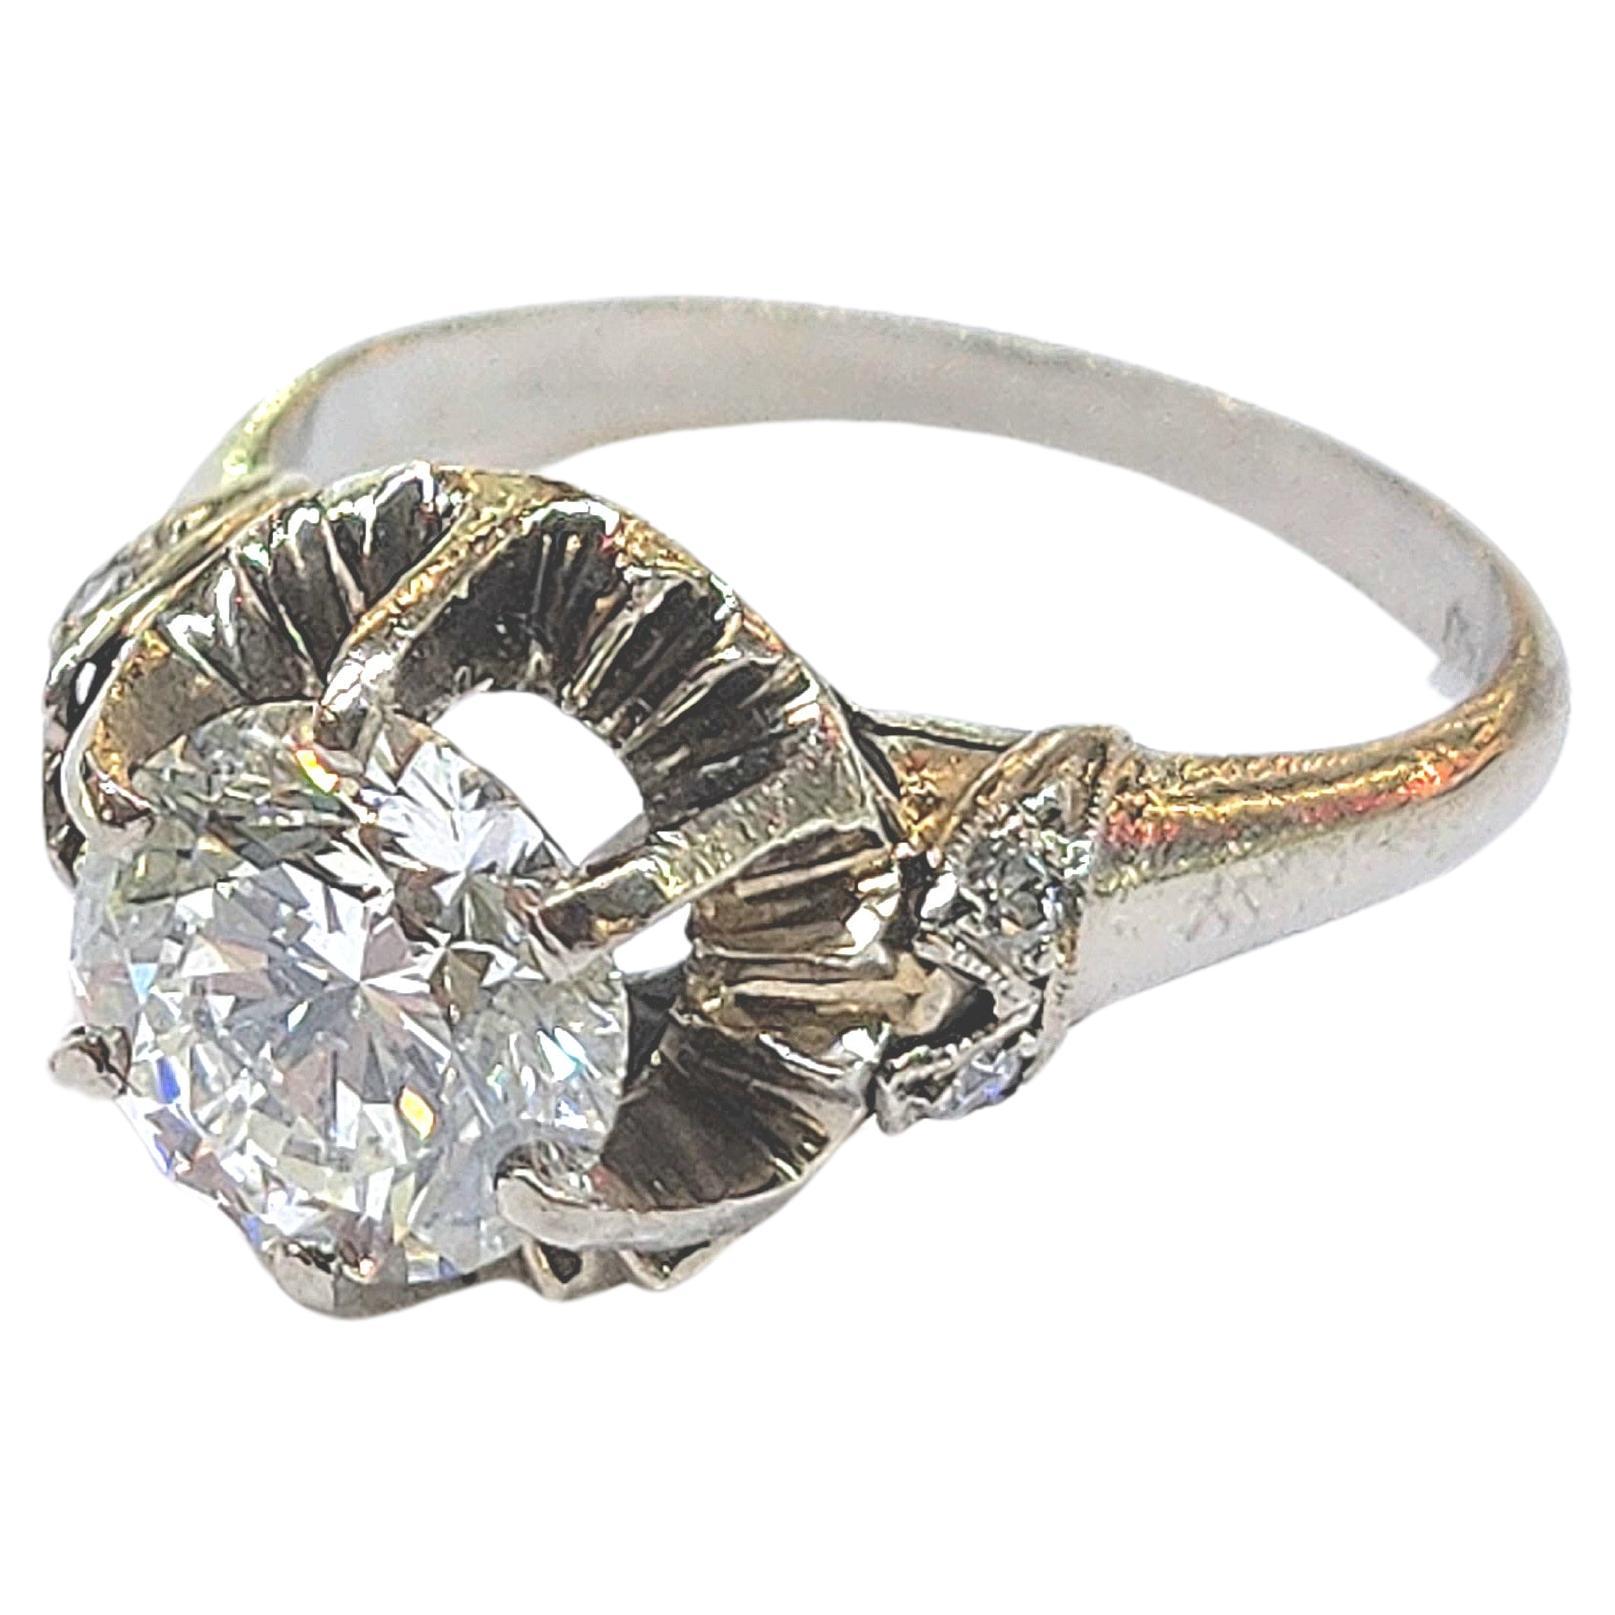 Art deco era 1920s white gold ring centered with large 1.60 carat european round cut diamond H color white vvs2 clearity excellent cut and spark in fine detailed ring work hall marked 750 for 18k gold finest